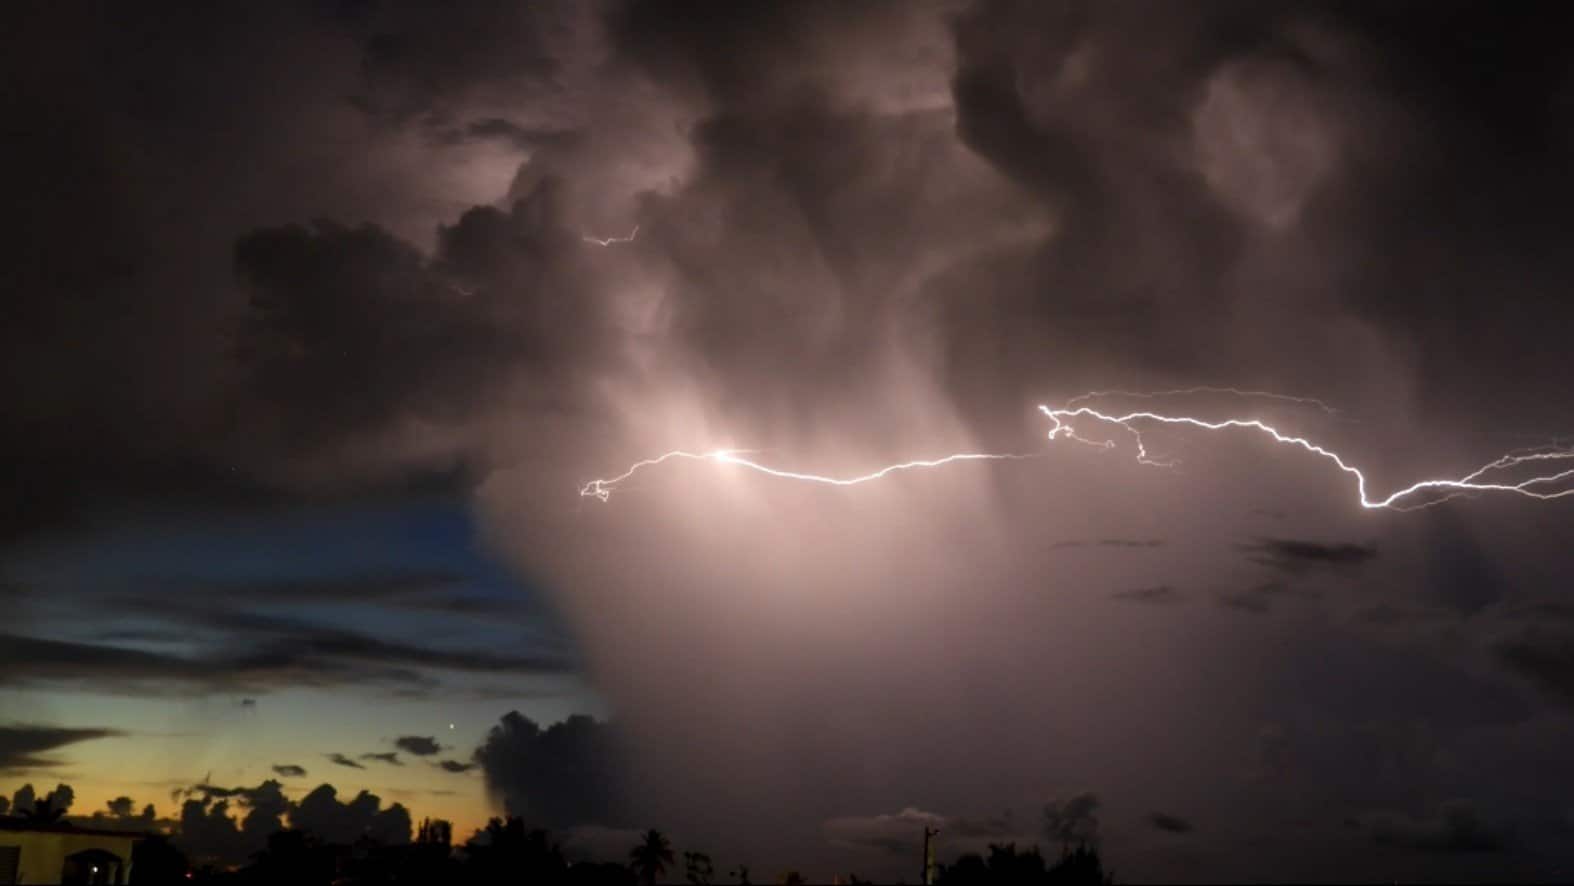 3rd Place Lightning Storm rushing over the Atlantic, Puerto Rico by Ann Rivera @annie7362